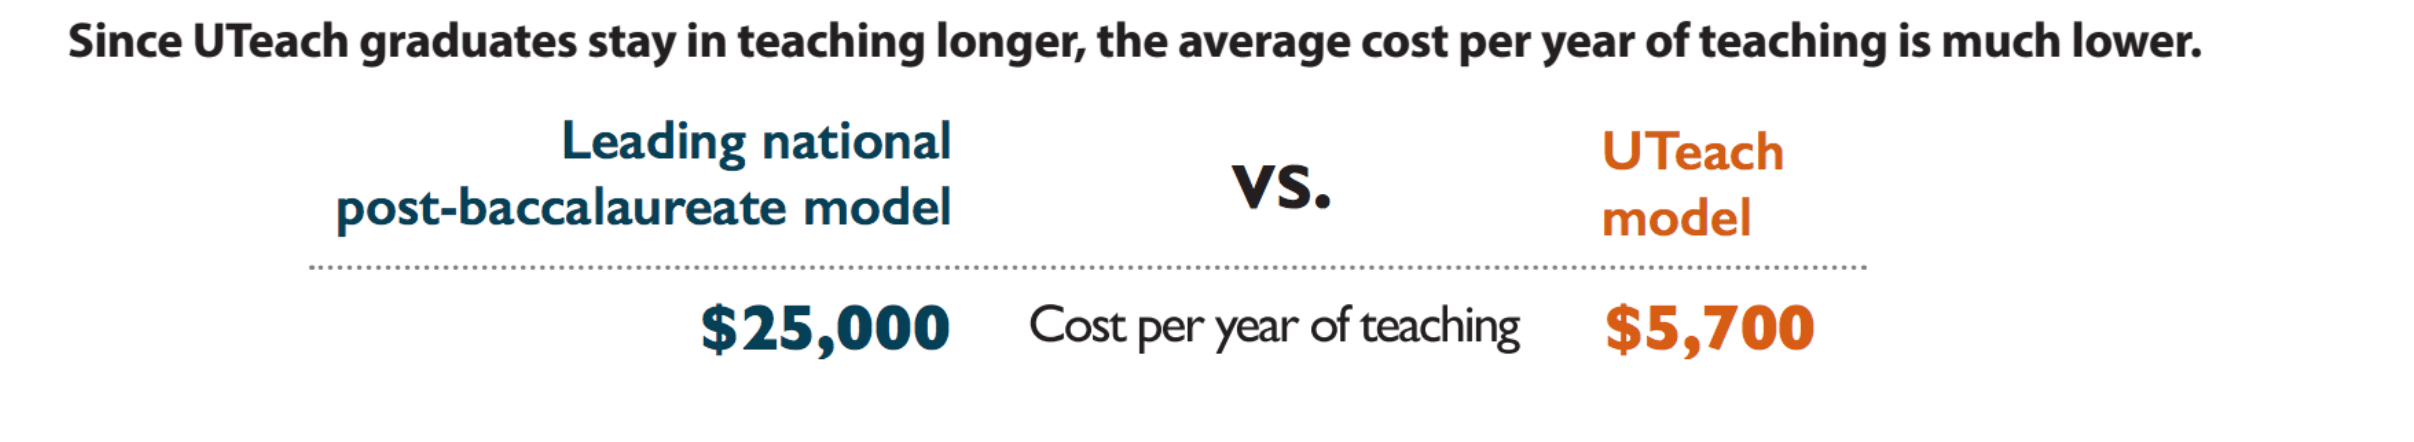 When comparing cost and length of employment, it is more affordable to higher a UTeach graduate.